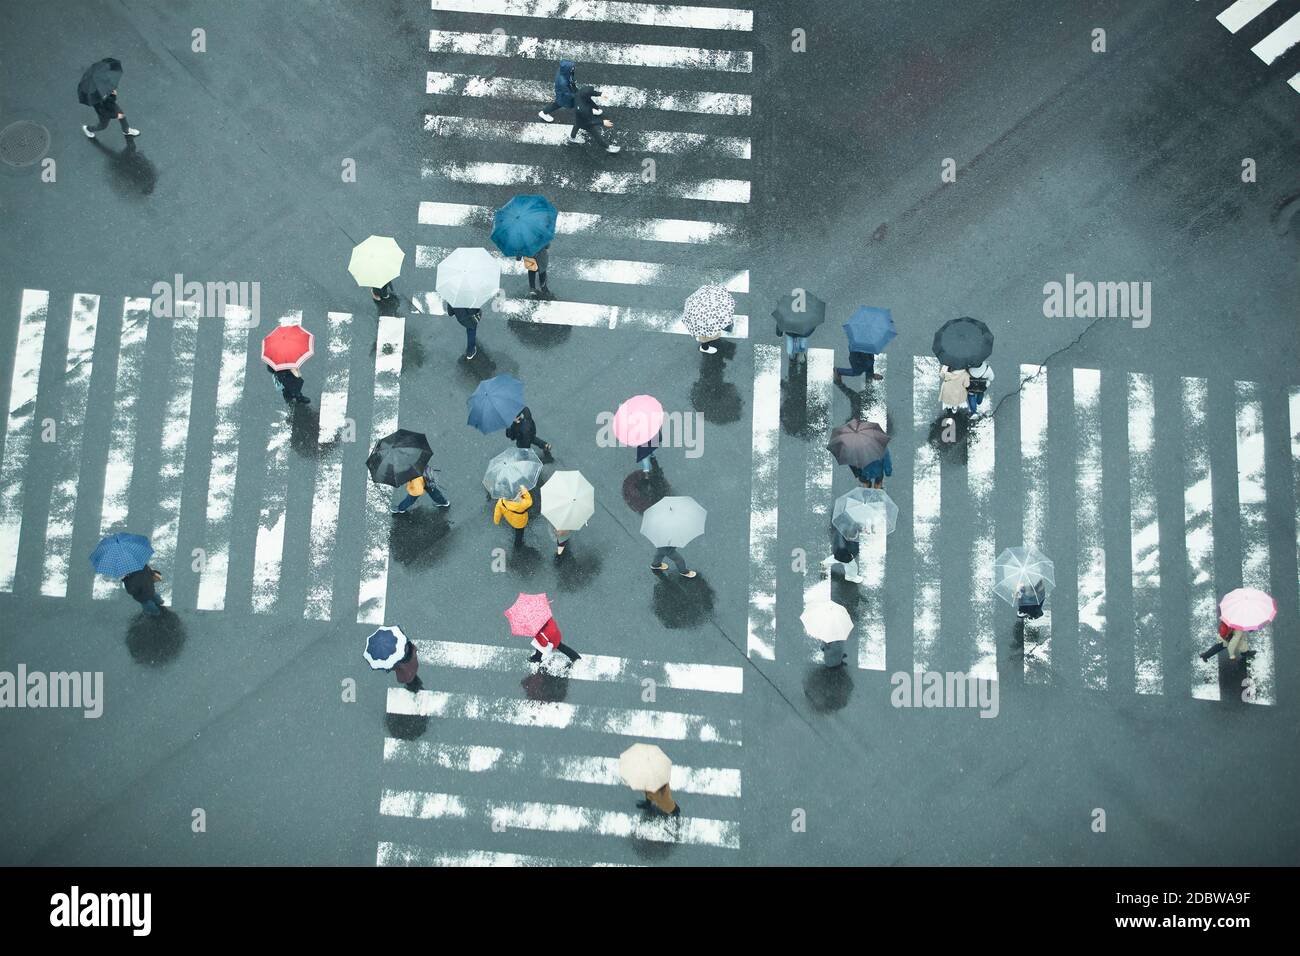 People Crossing A Crossroad On A Rainy Day In Tokyo, Japan, Stock Photo,  Picture And Royalty Free Image. Pic. ALF-133201605